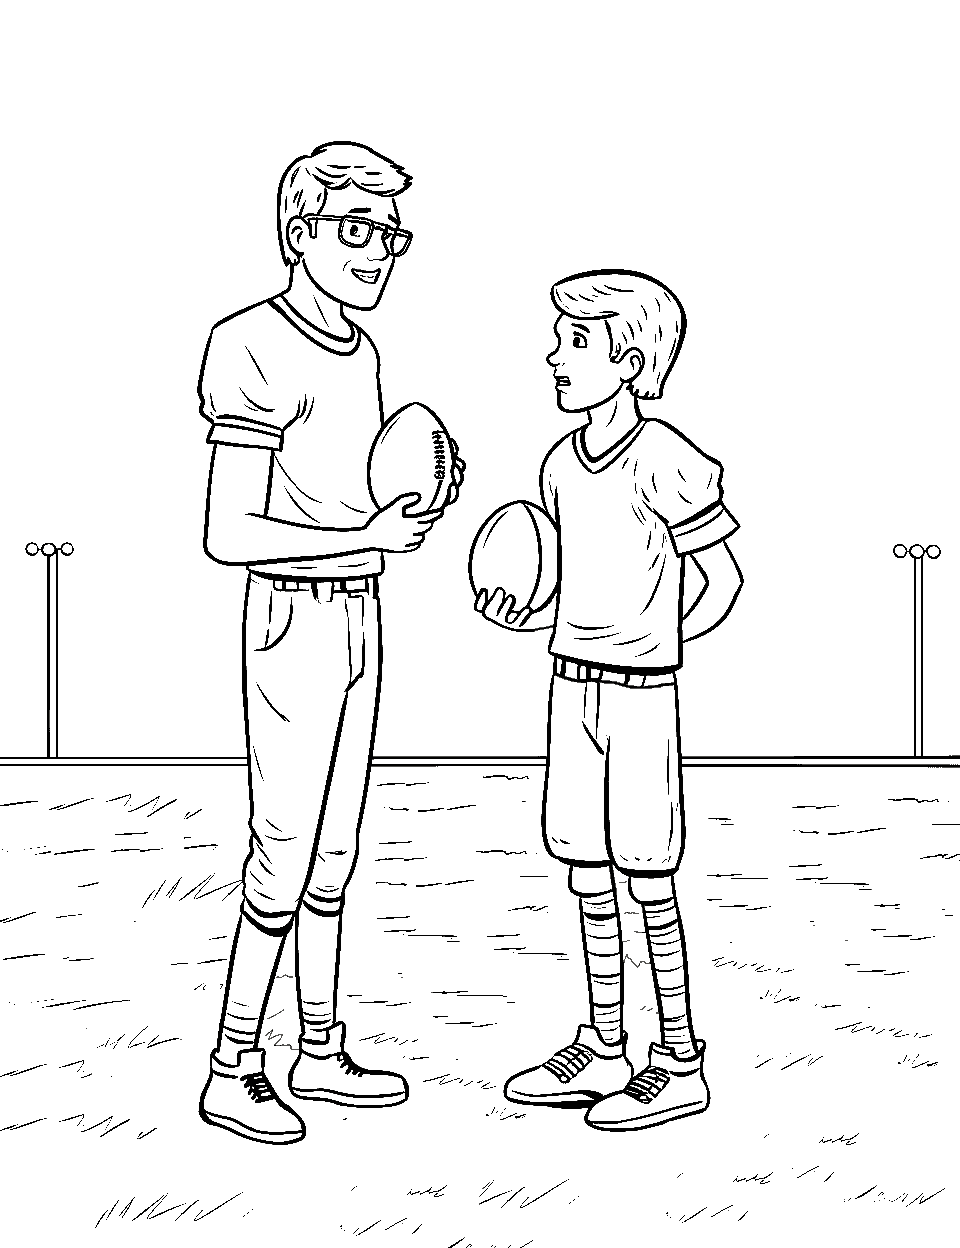 Coach Discussing Strategy Coloring Page - A player and a coach discussing play strategy on the field.